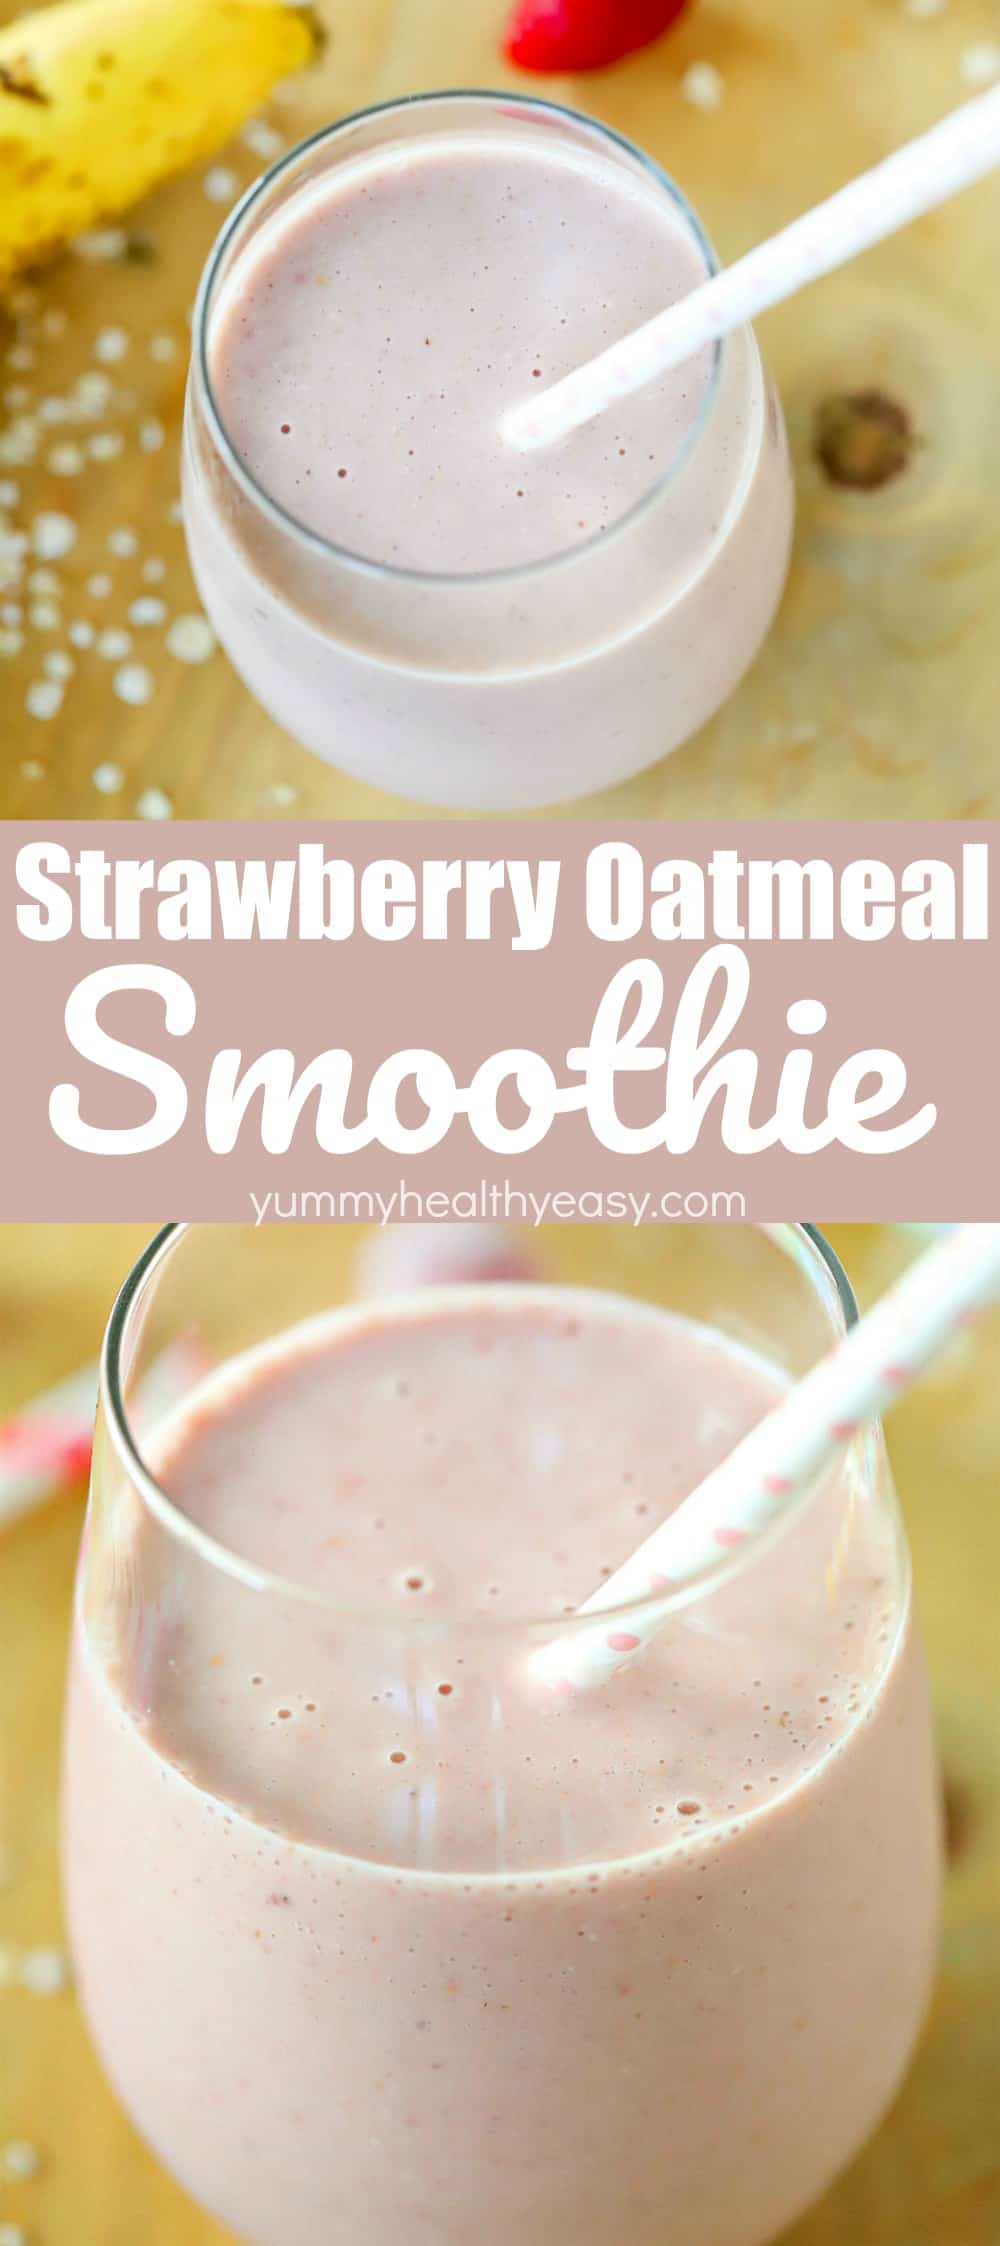 Make a delicious strawberry oatmeal smoothie that tastes great and comes packed with nutrition. So easy to make - this will be your new favorite breakfast smoothie recipe!
#breakfast #smoothie #strawberry #oatmeal #easyrecipes #healthyrecipe #yummy #healthy #easy via @jennikolaus